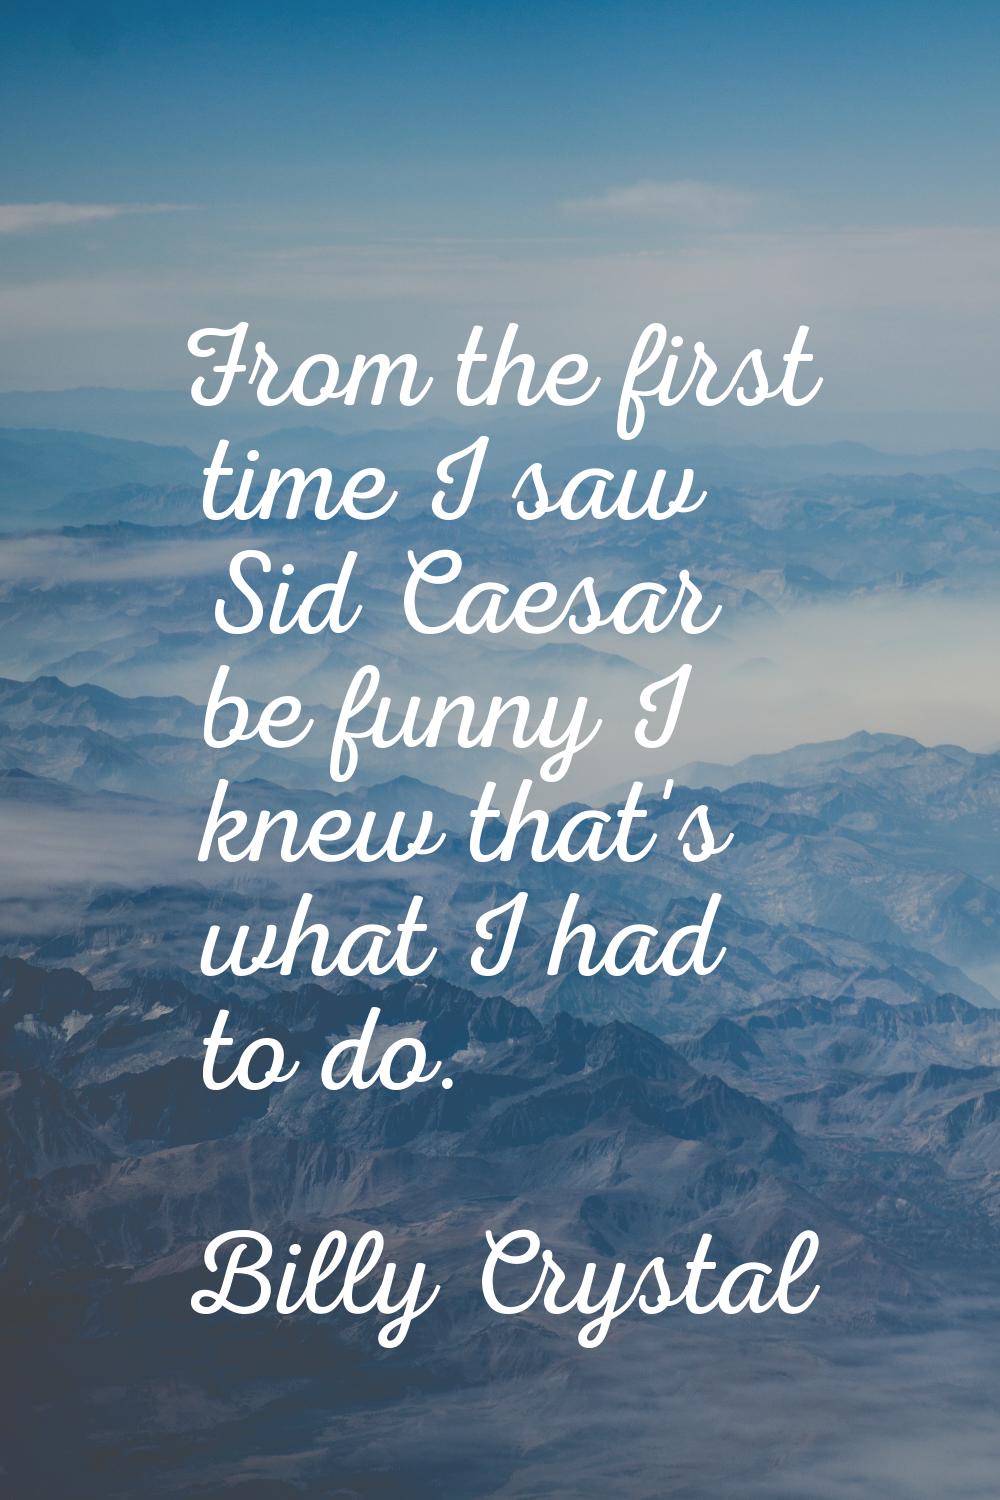 From the first time I saw Sid Caesar be funny I knew that's what I had to do.